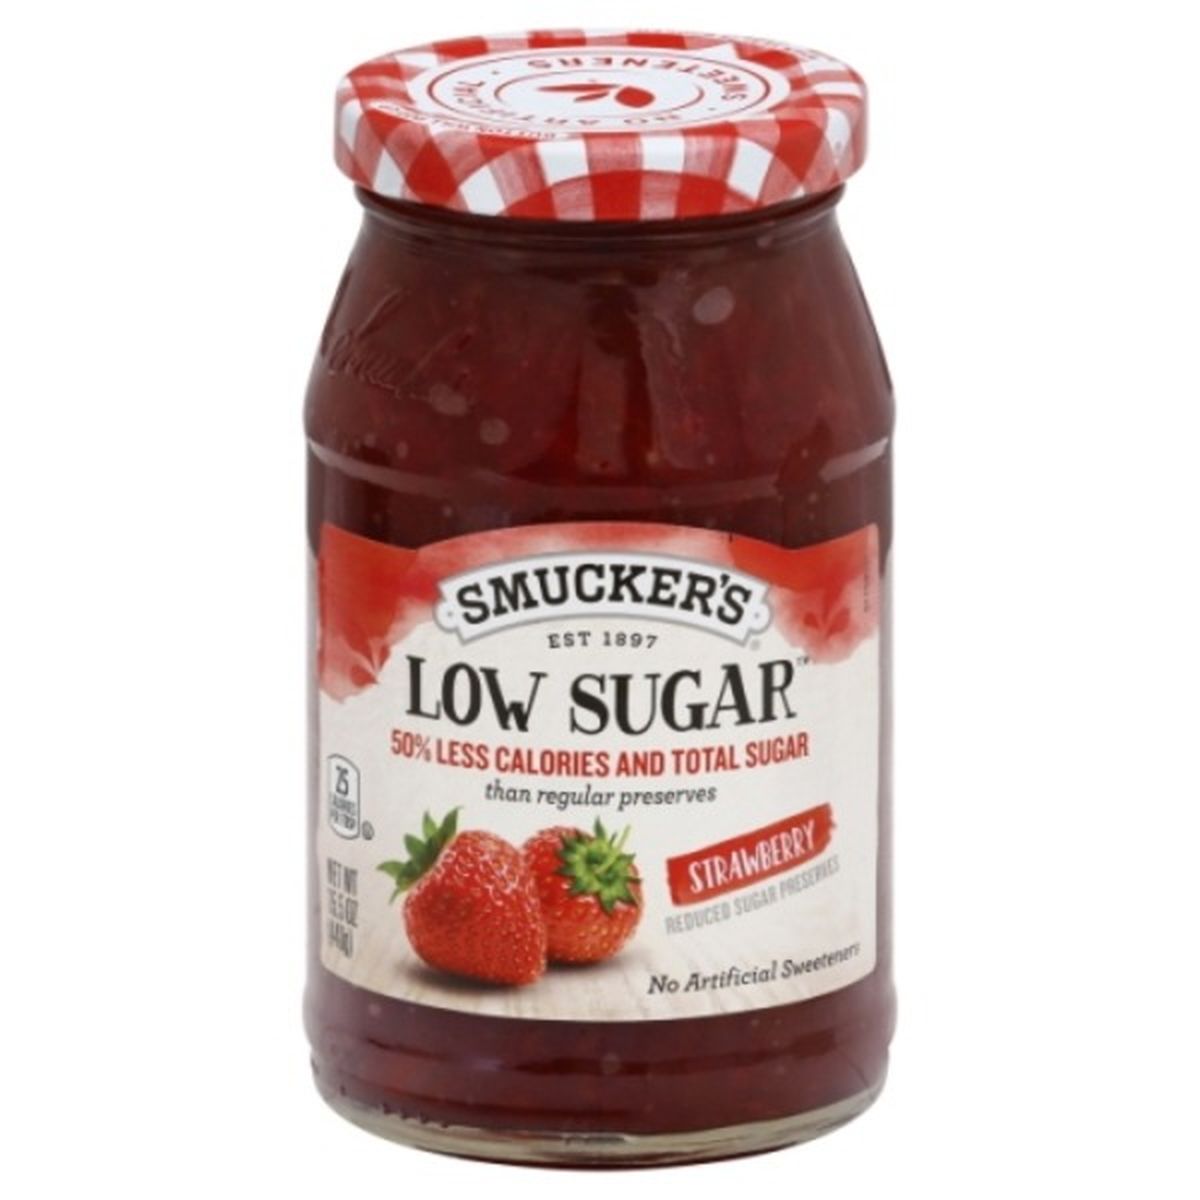 Calories in Smucker's Jelly, Reduced Sugar Preserves, Strawberry